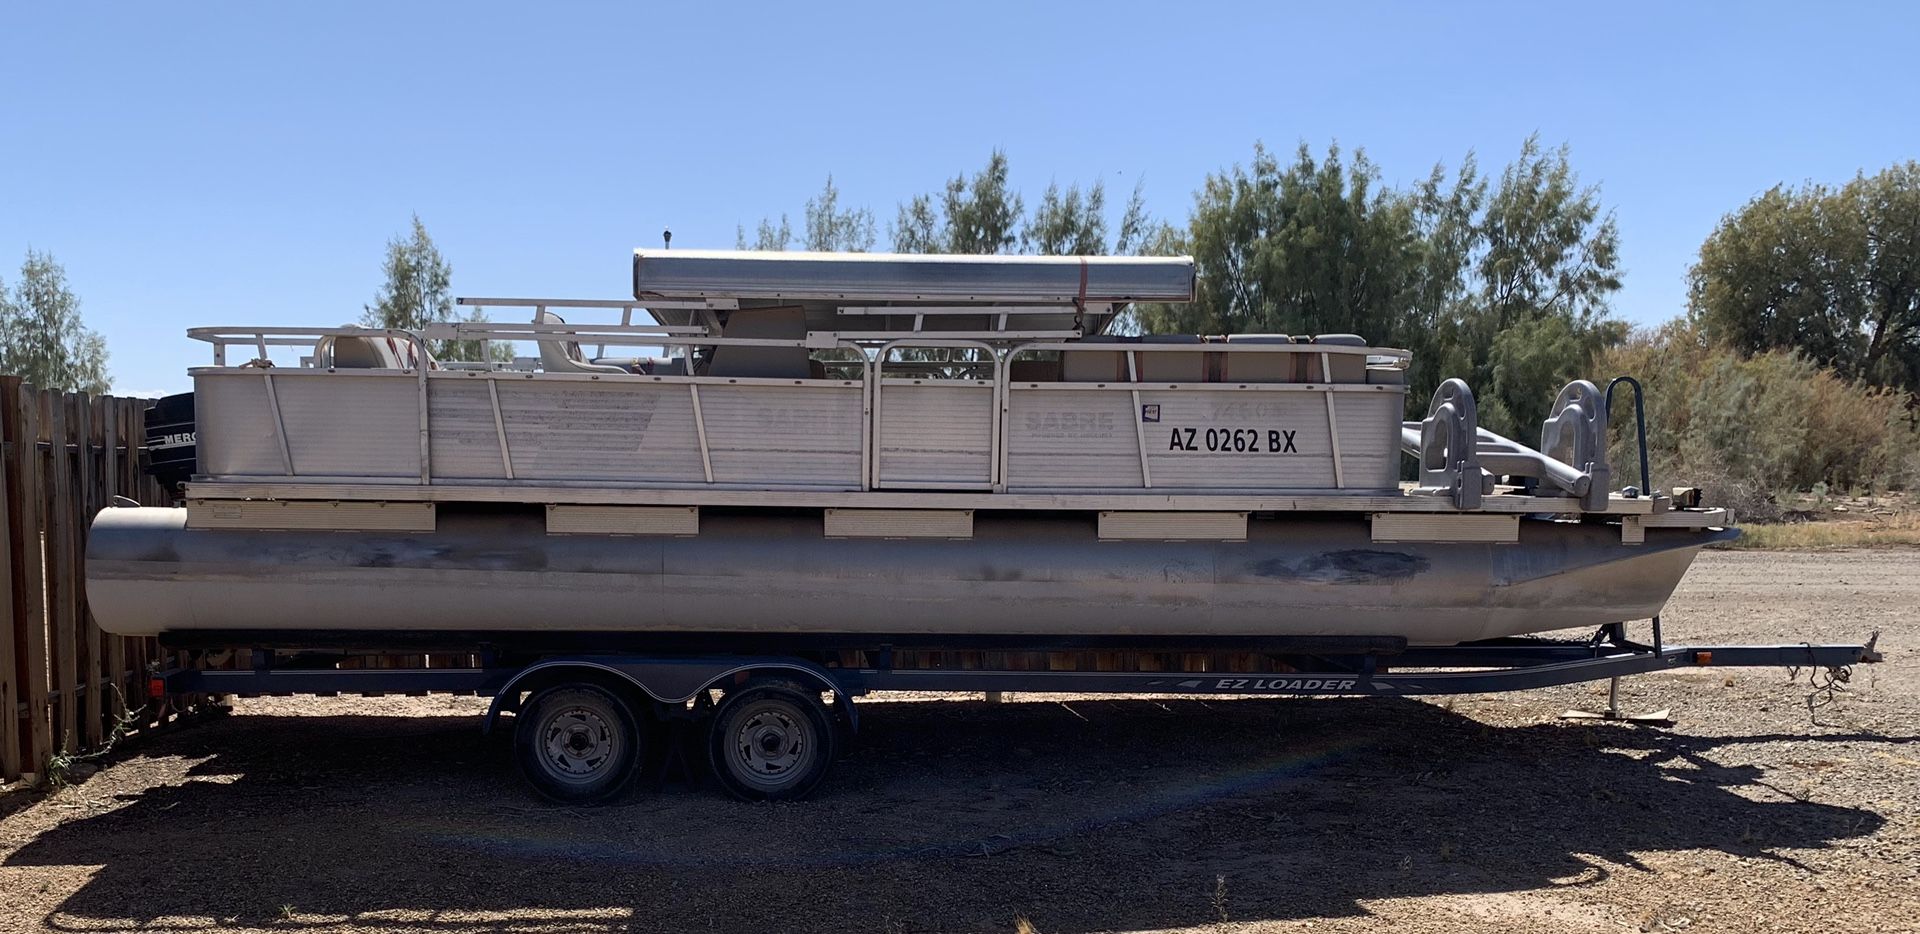 25ft pontoon boat Aluminum shade Needs upholstery and TLC Been sitting awhile Too much boat for owner Good motor 45hp Mercury in Ehrenberg, AZk